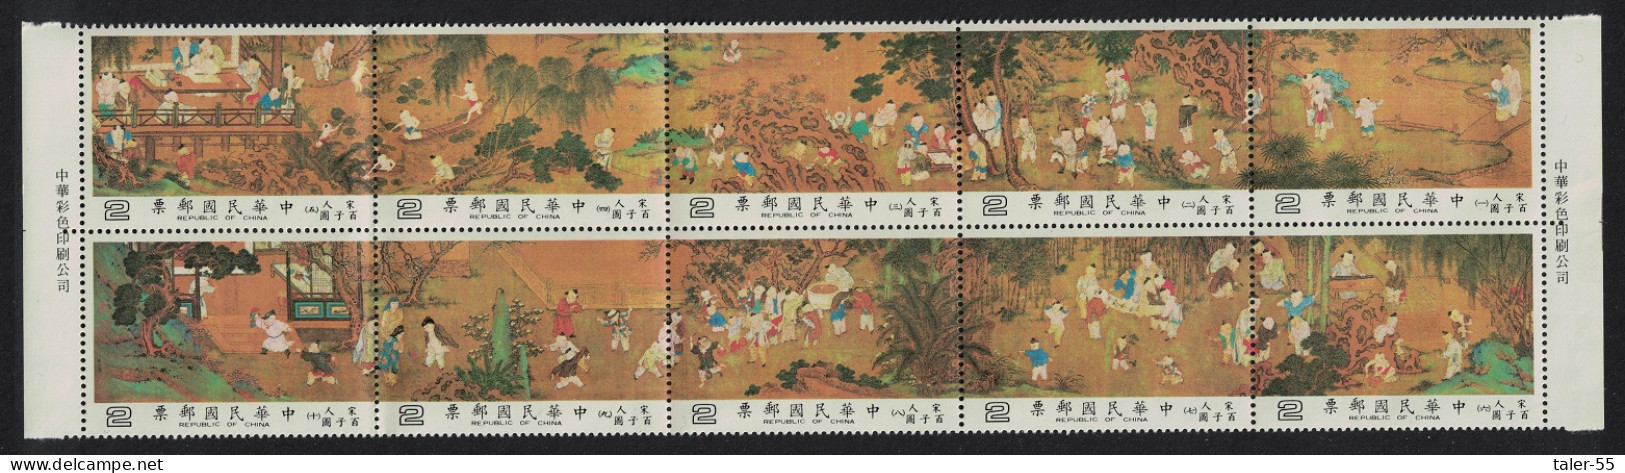 Taiwan Sung Dynasty Painting 'One Hundred Young Boys' 10v T2 1981 MNH SG#1403-1412 - Ongebruikt